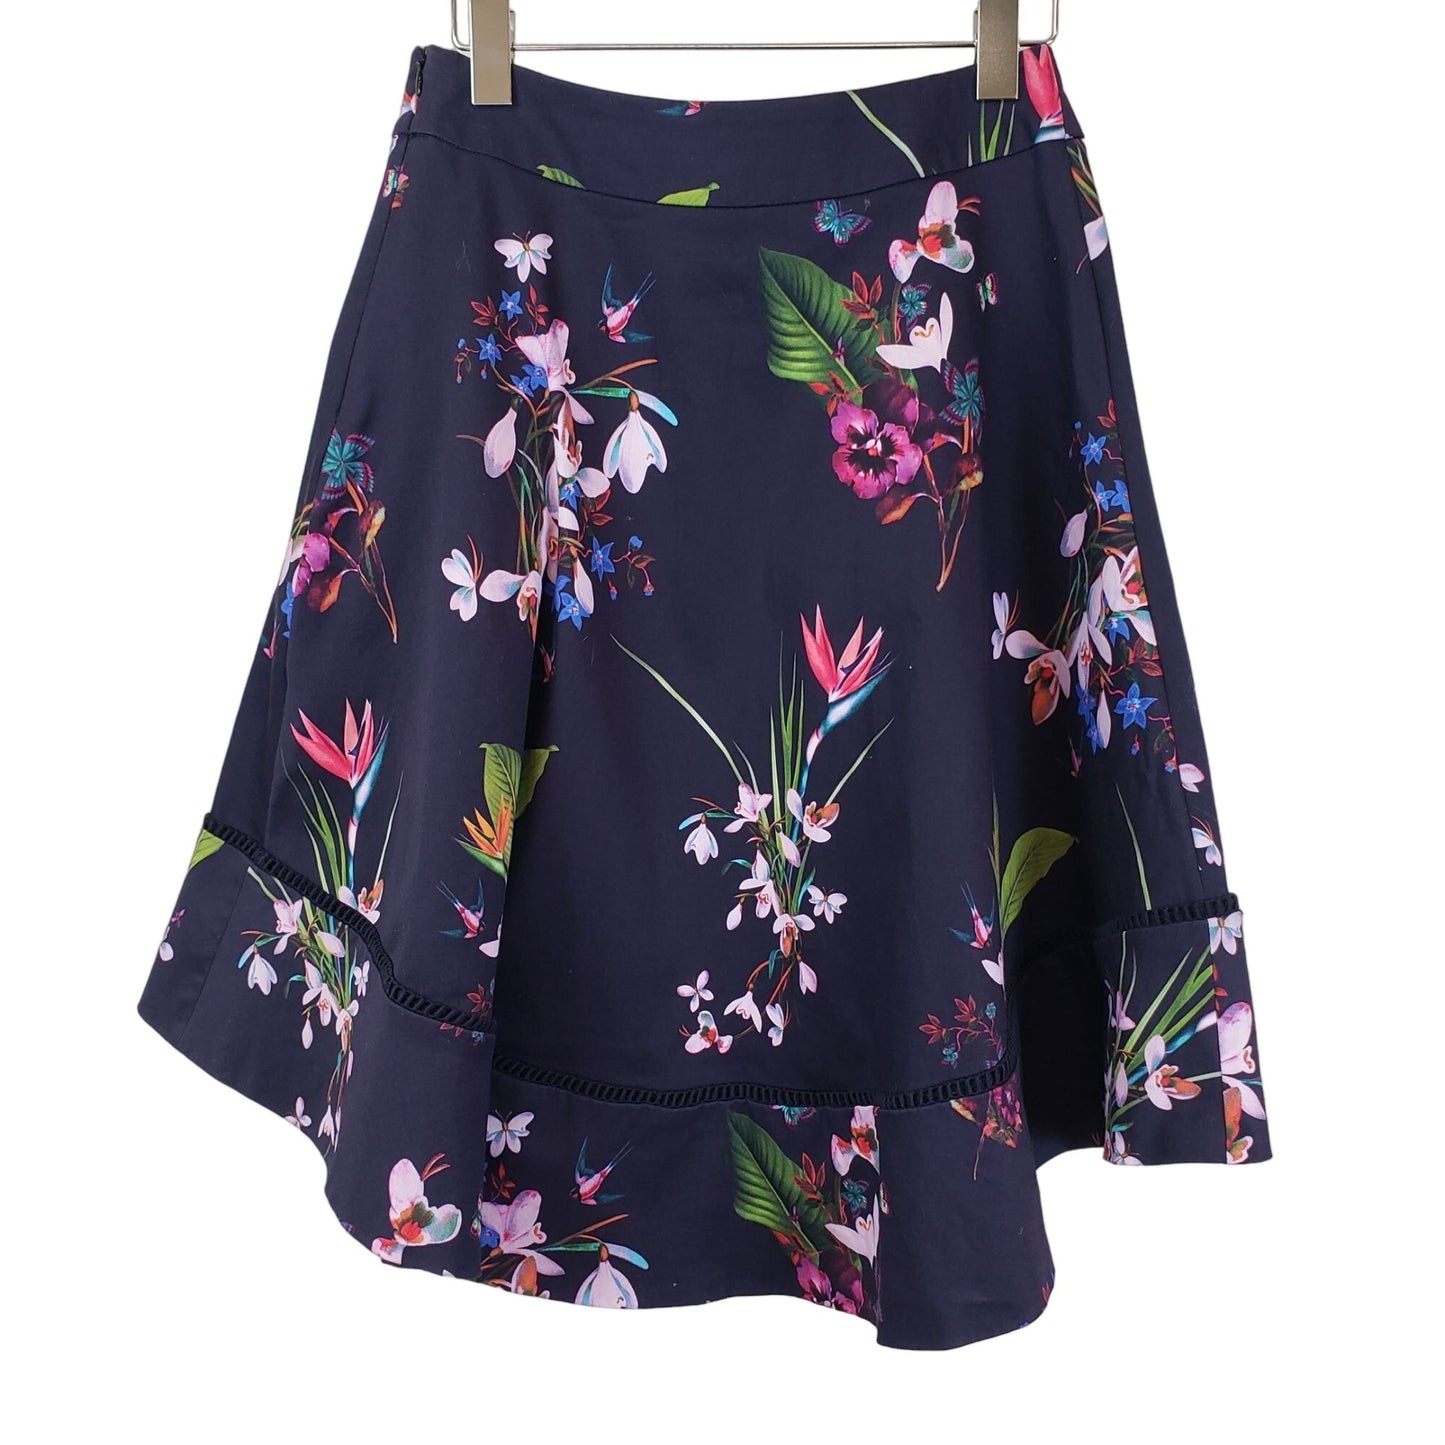 Ted Baker Plio Skirt in Tropical Oasis Floral Print Size TB 2/US 6